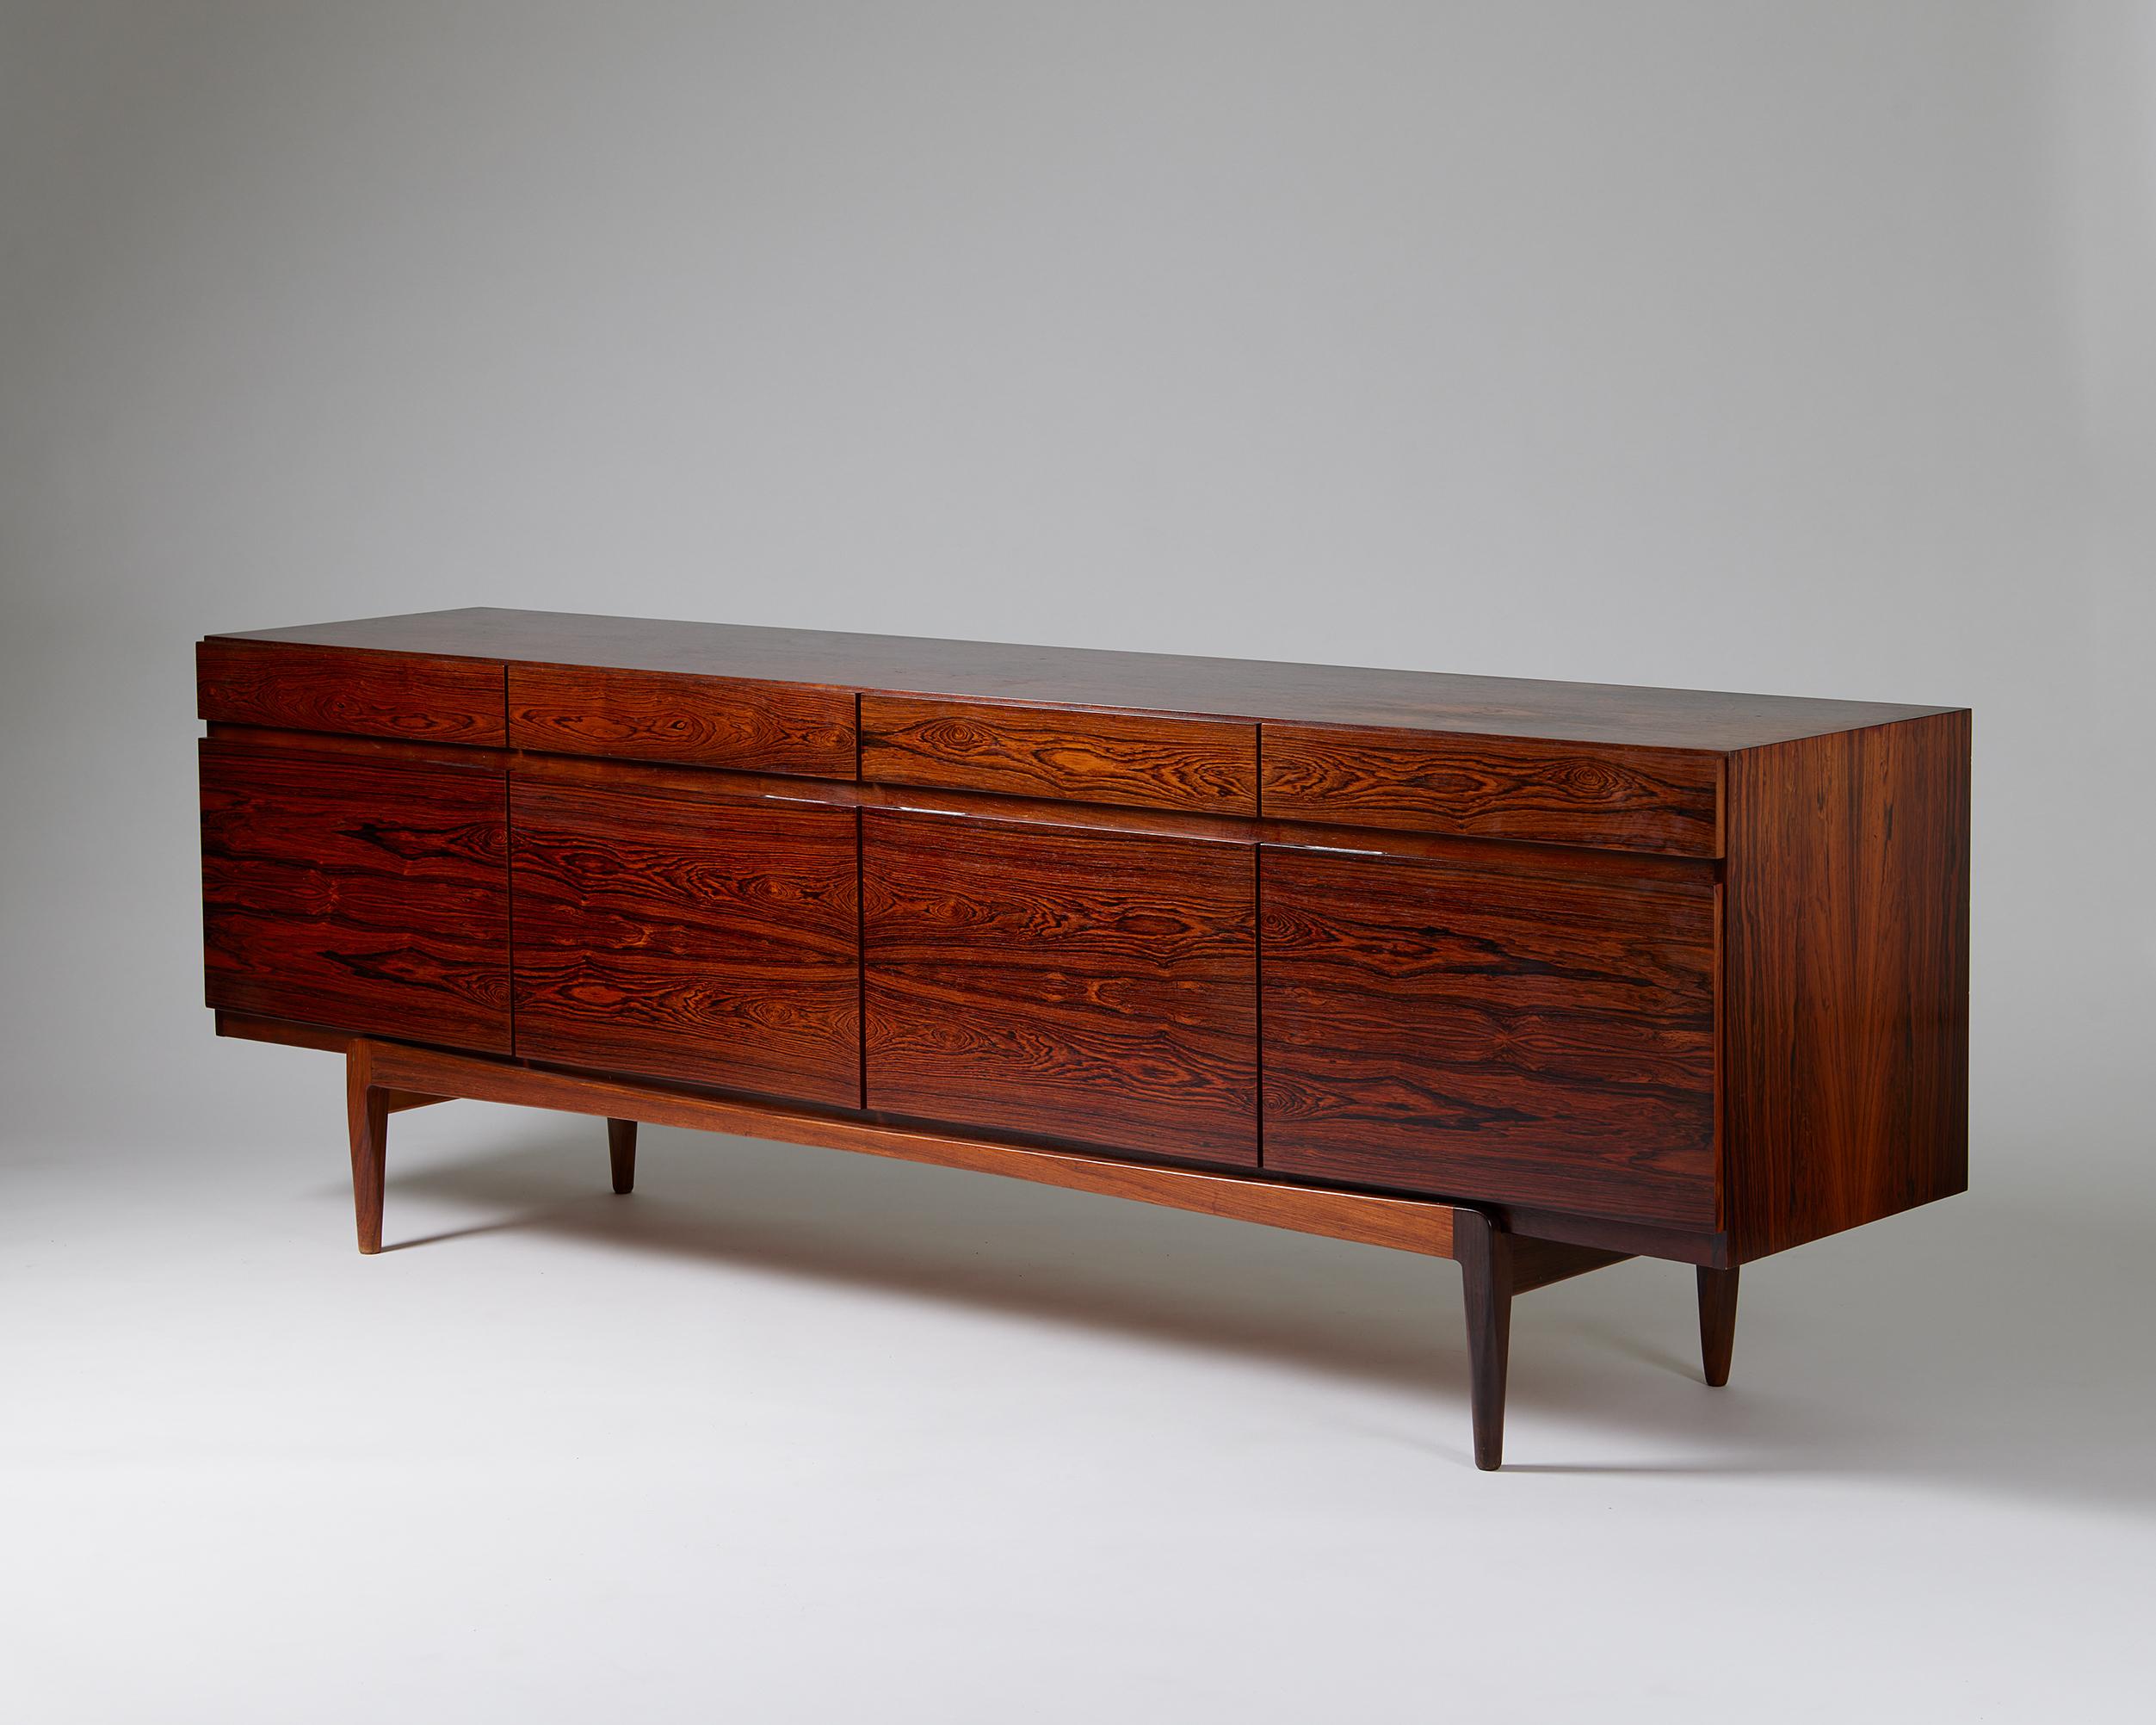 The clean lines of Ib Kofod-Larsen’s model FA 66 in rosewood make it a notable Scandinavian mid-century collectable. Remarkably, it appears as if the elegant body balances on a separate cradle, but the base is in fact attached. Combining